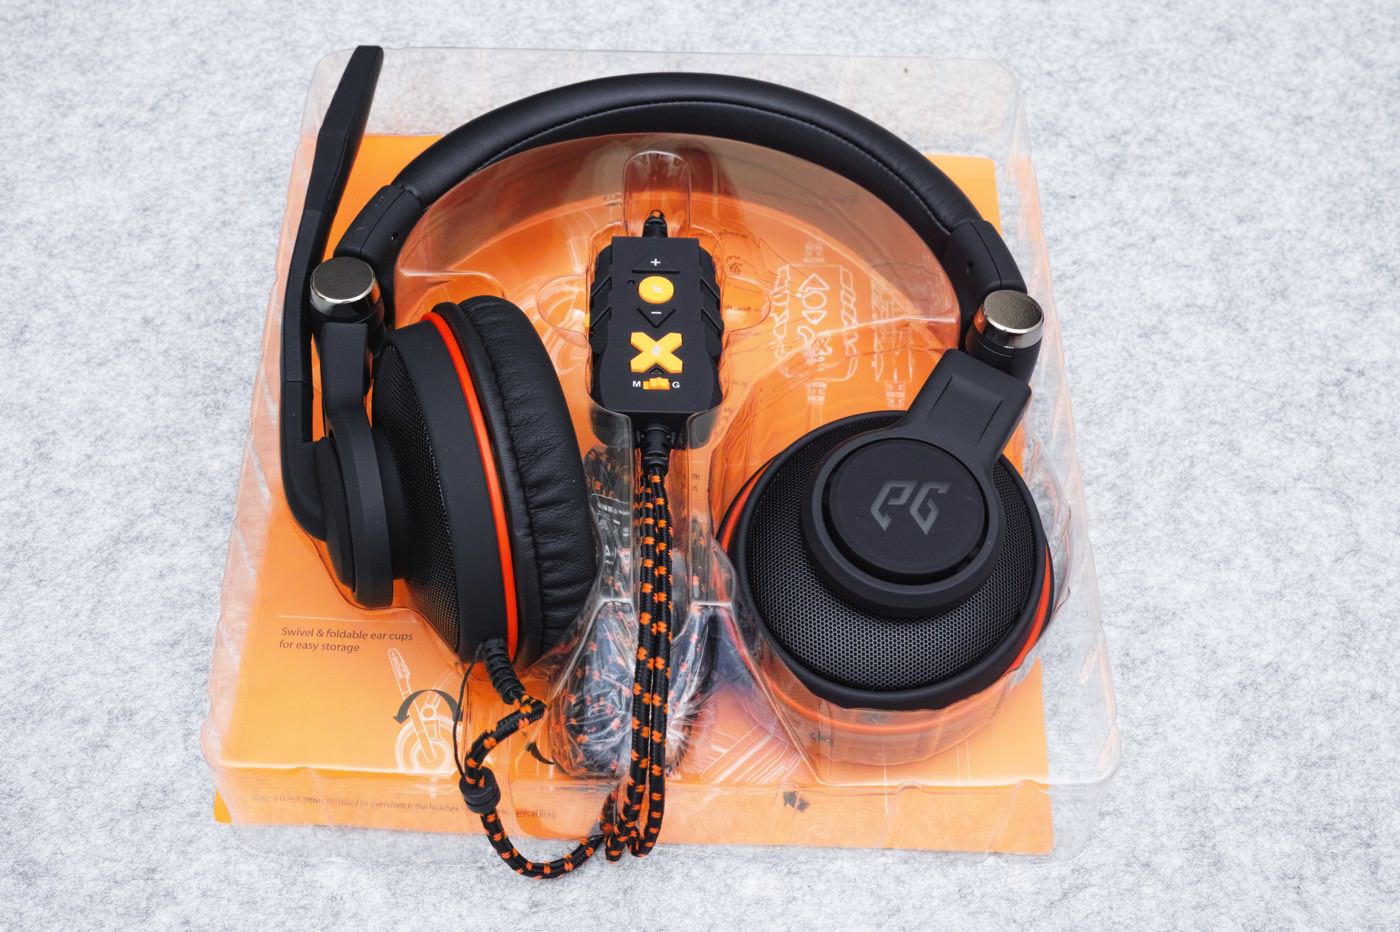 Epicgear sonorouz x gaming headset review 00002 1